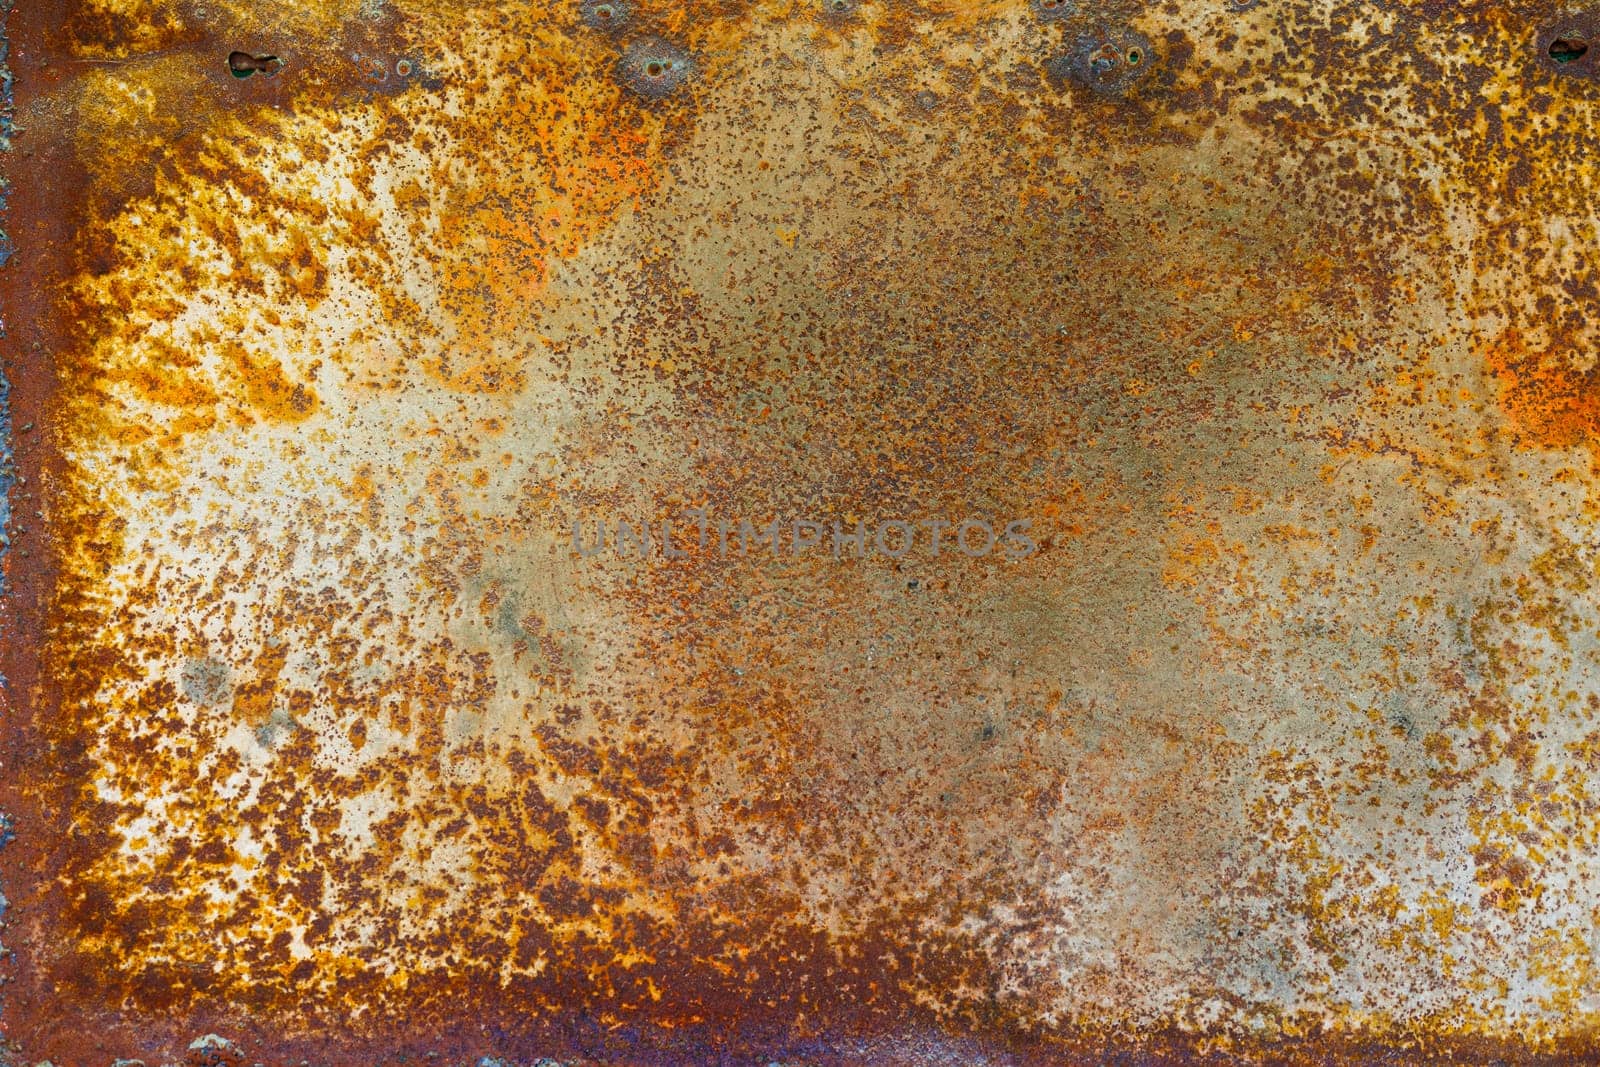 Close up of a brownish rusted sheet metal surface with yellowish and orange hue and amber patina.